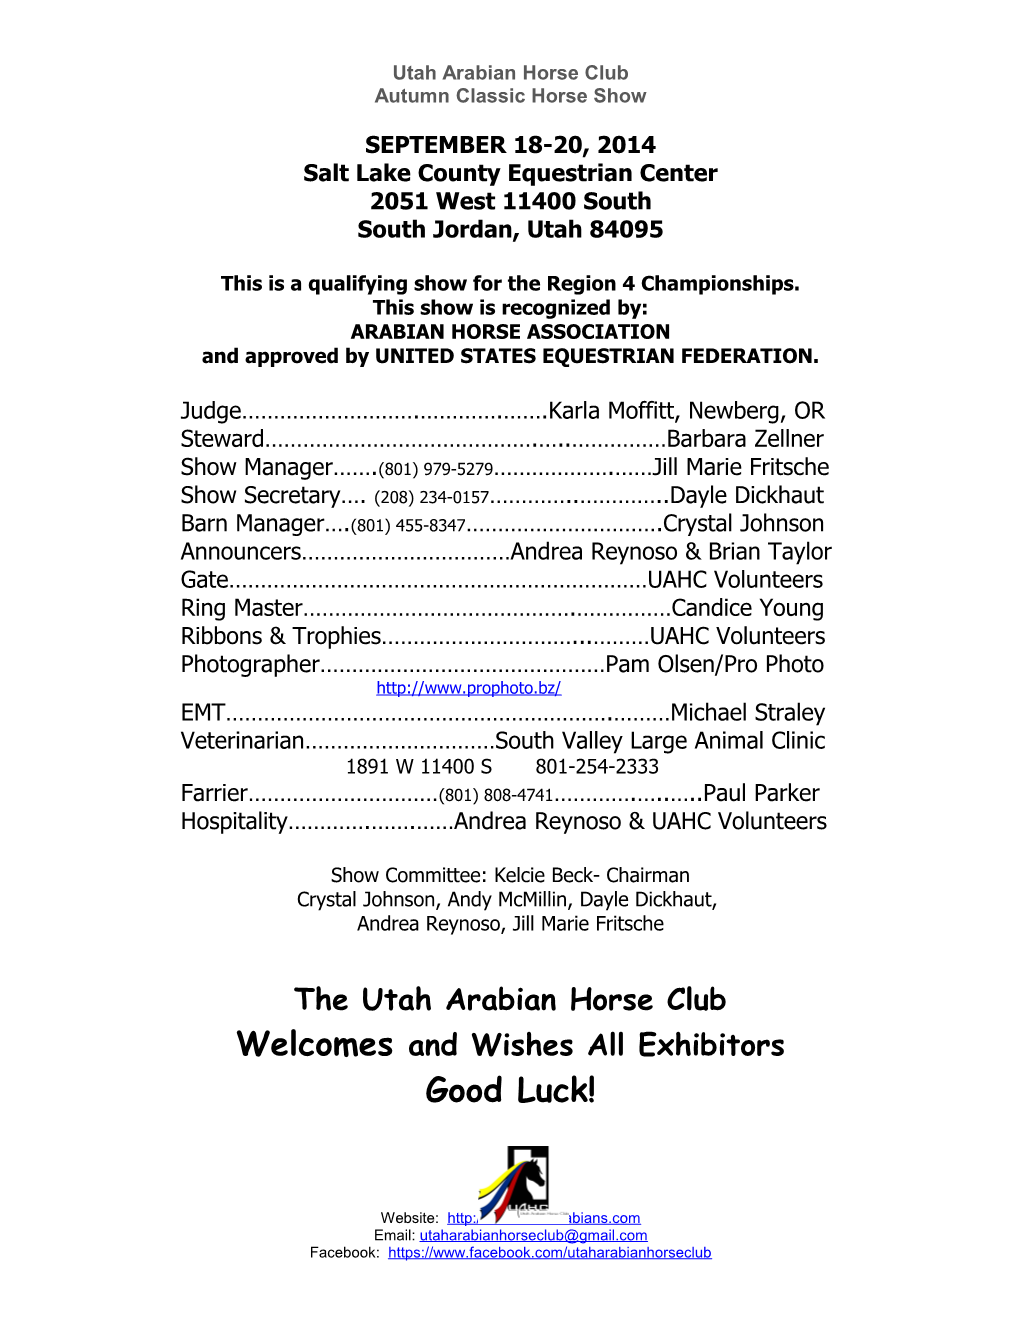 RULES the Utah Valley Arabian Show Is Conducted in Accordance with the Rules of the USEF